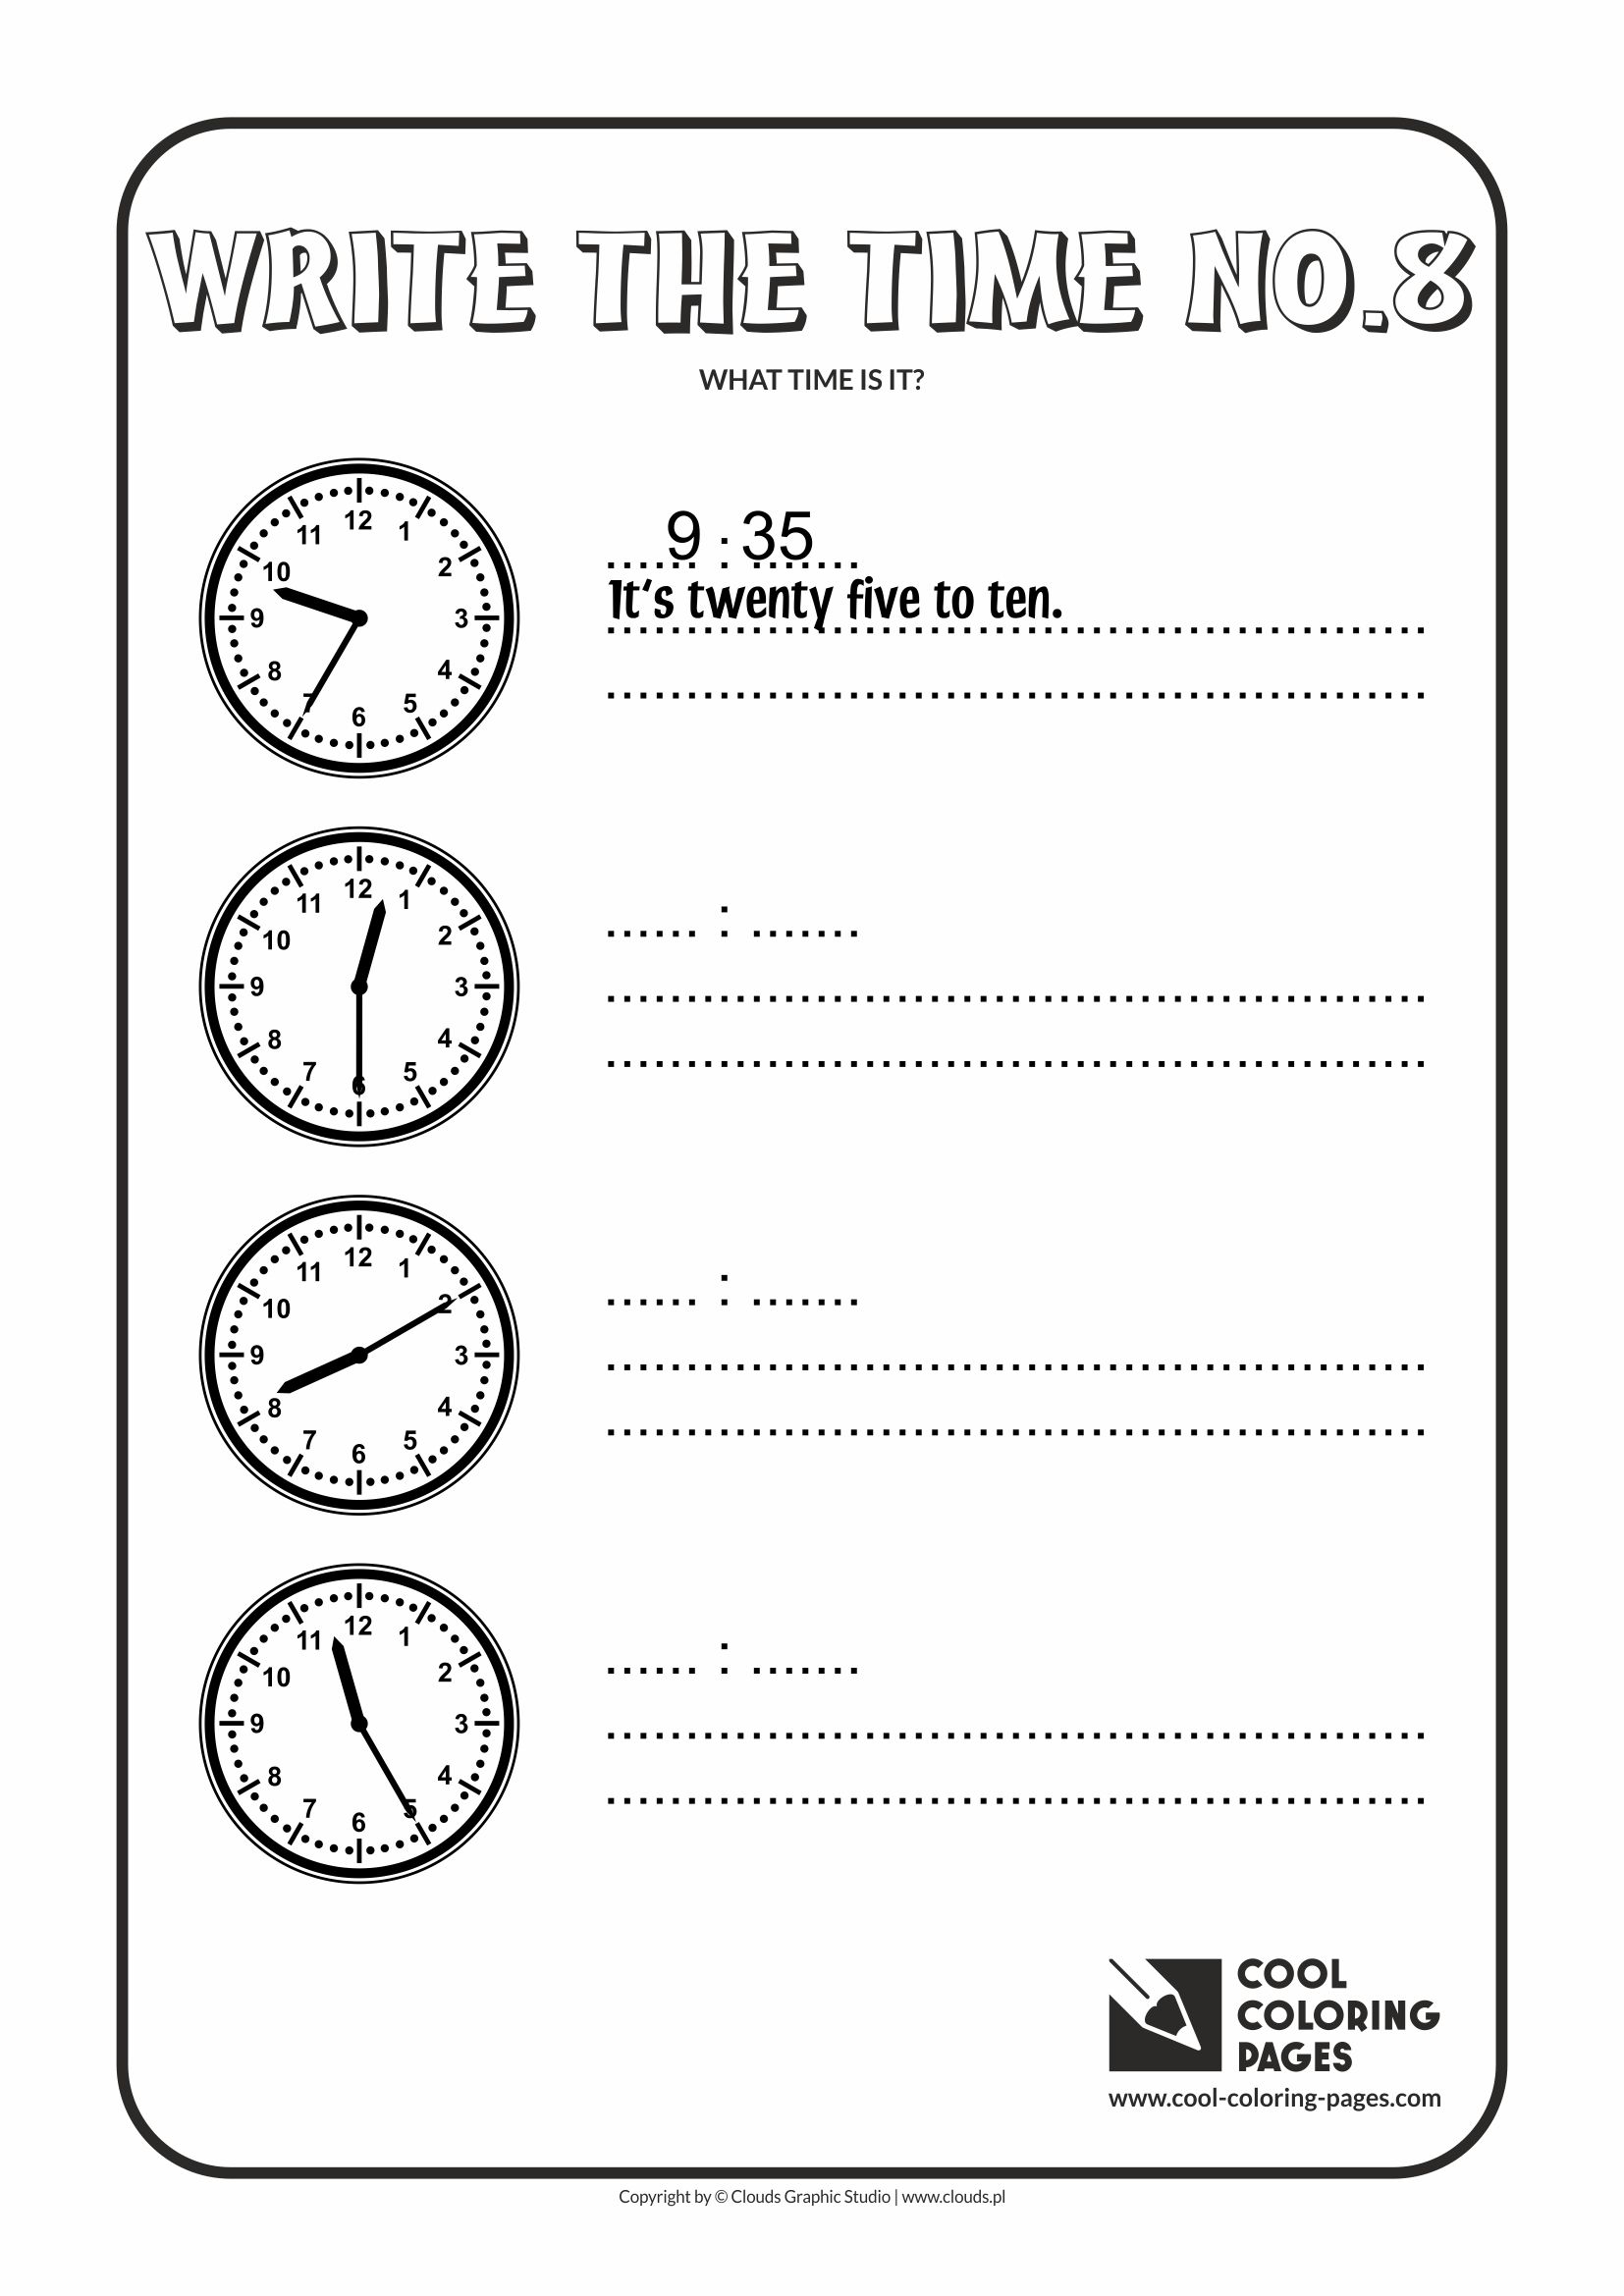 Cool Coloring Pages - Time / Write the time no.8